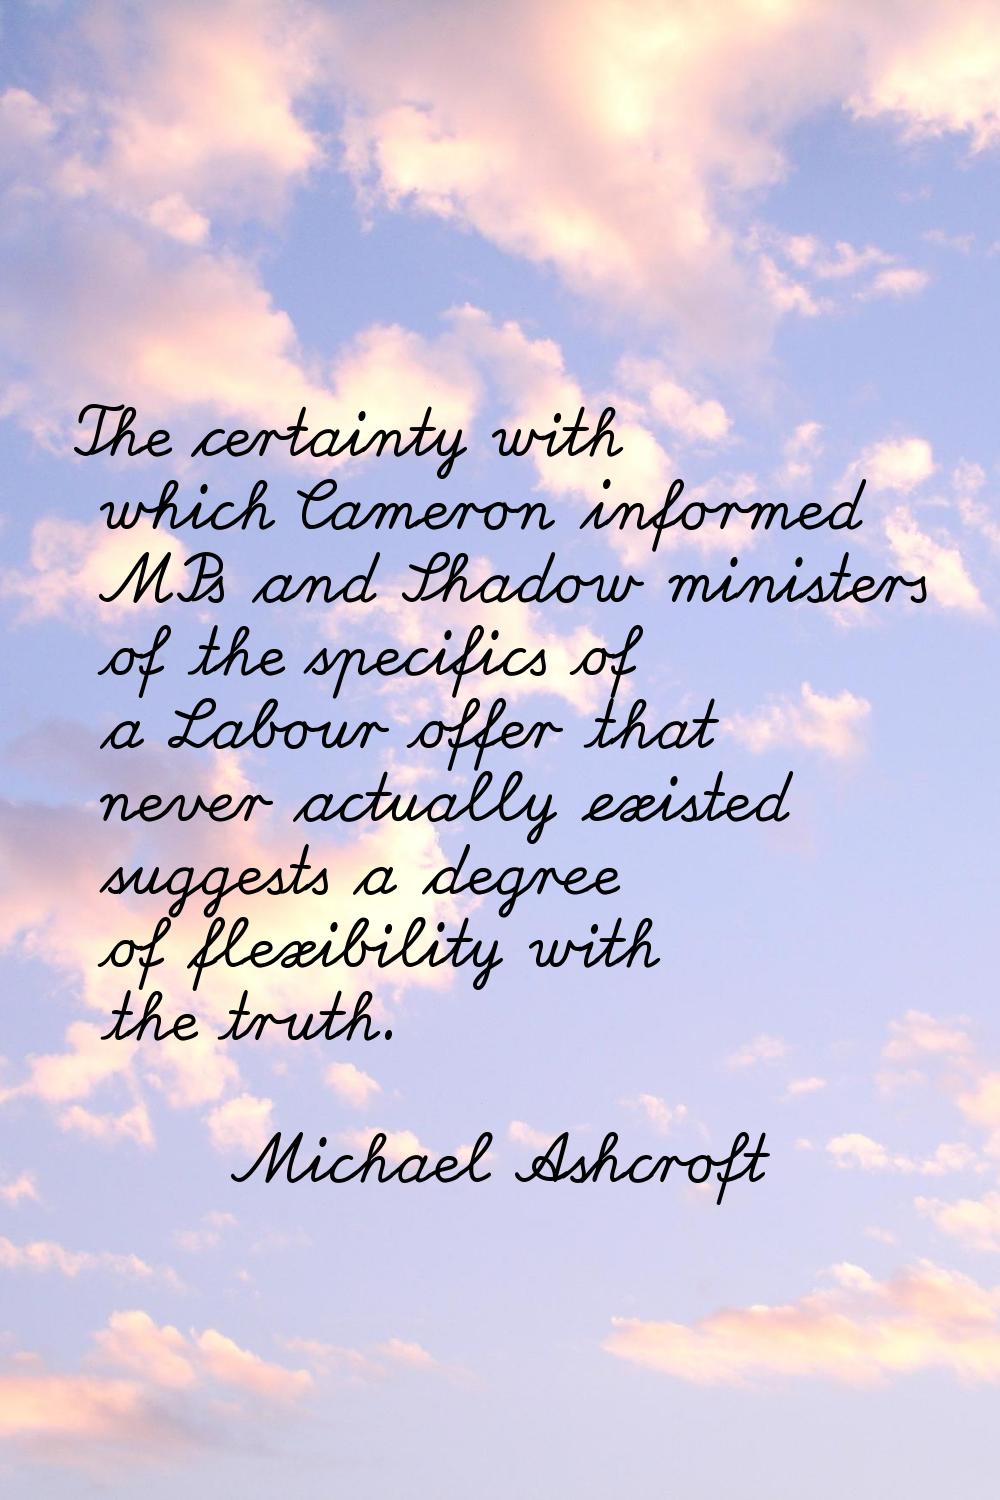 The certainty with which Cameron informed MPs and Shadow ministers of the specifics of a Labour off